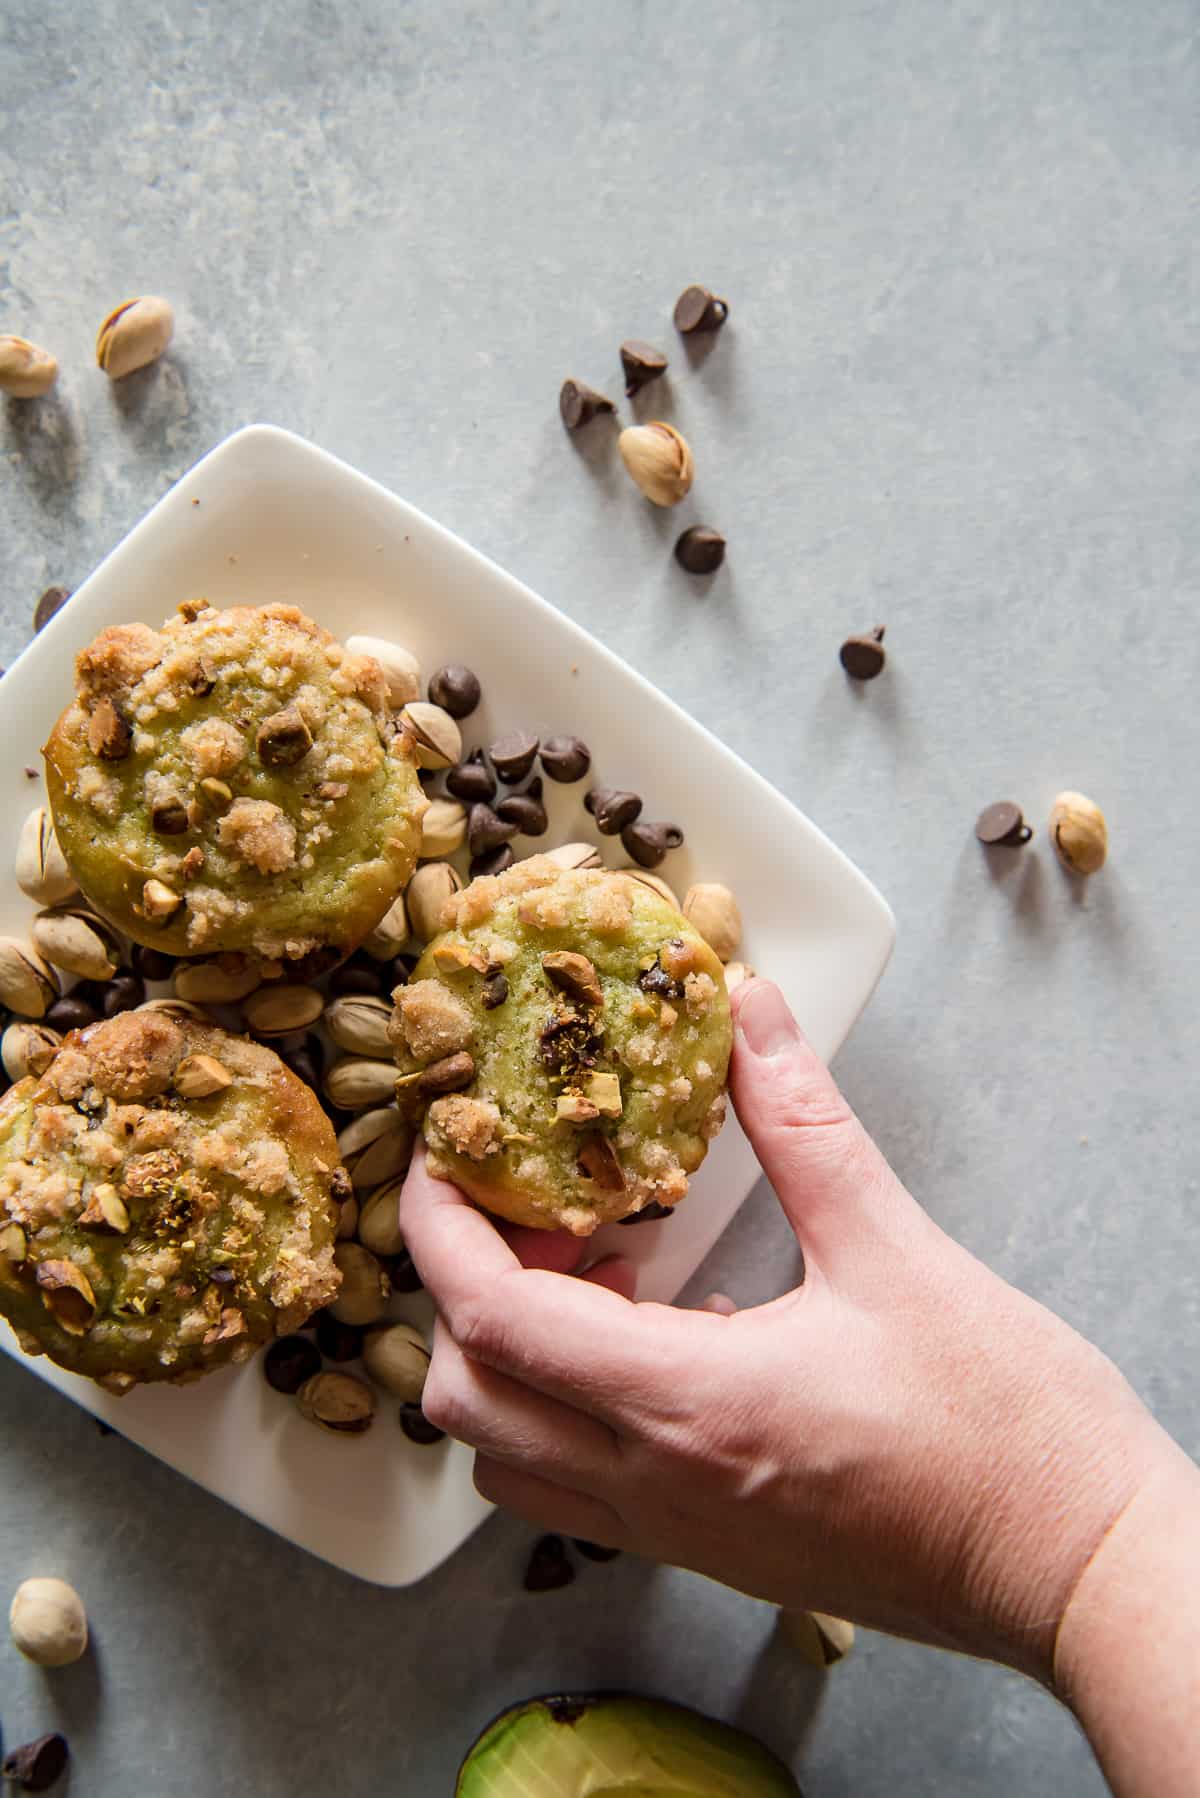 A hand lifting an avocado muffin from a plate.